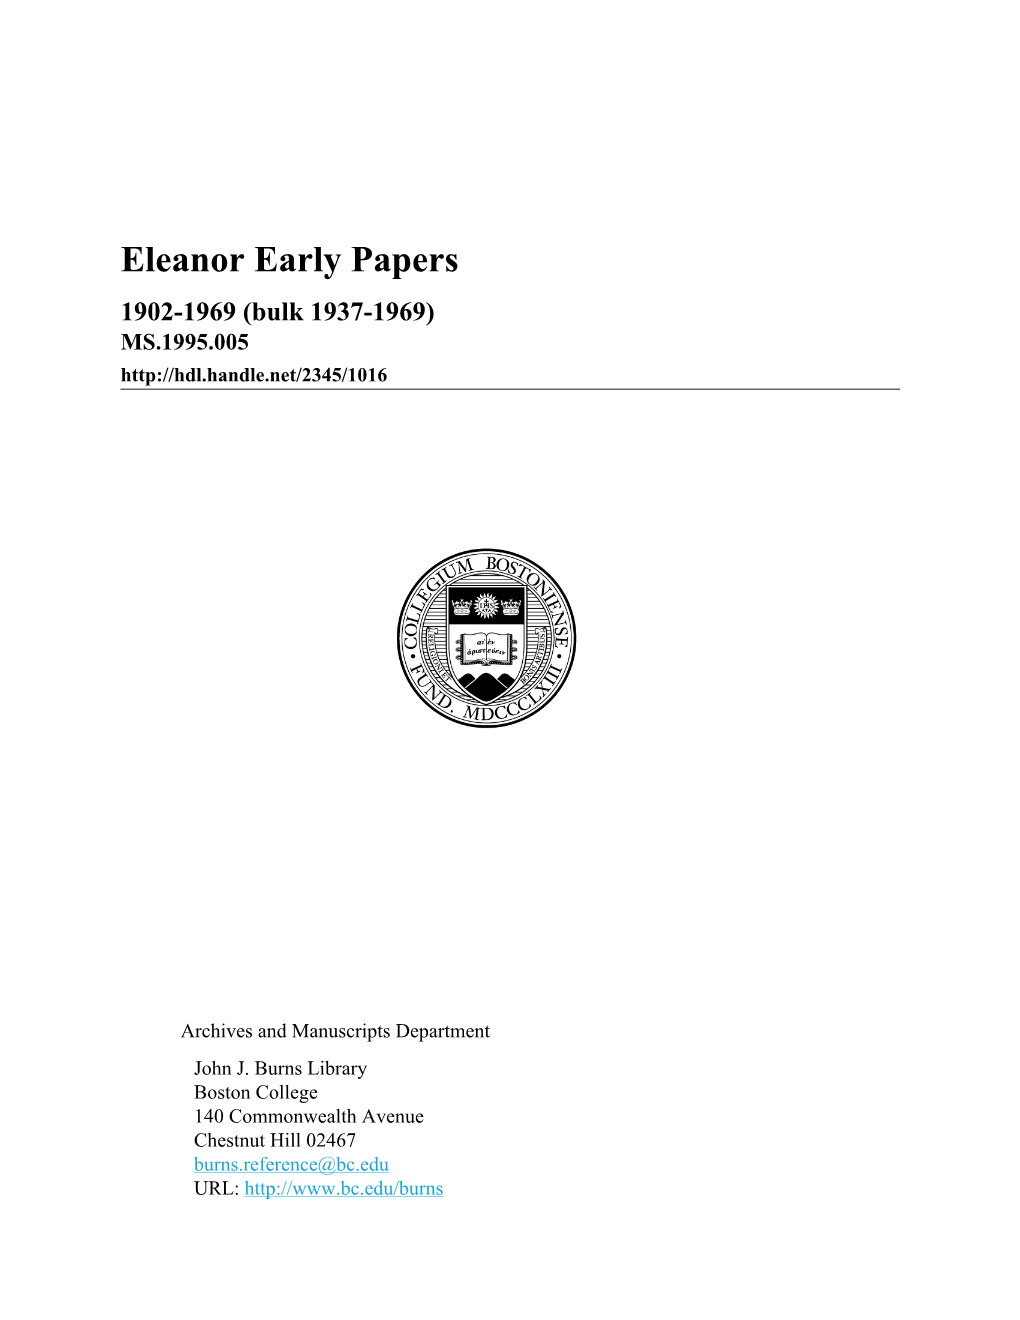 Eleanor Early Papers 1902-1969 (Bulk 1937-1969) MS.1995.005